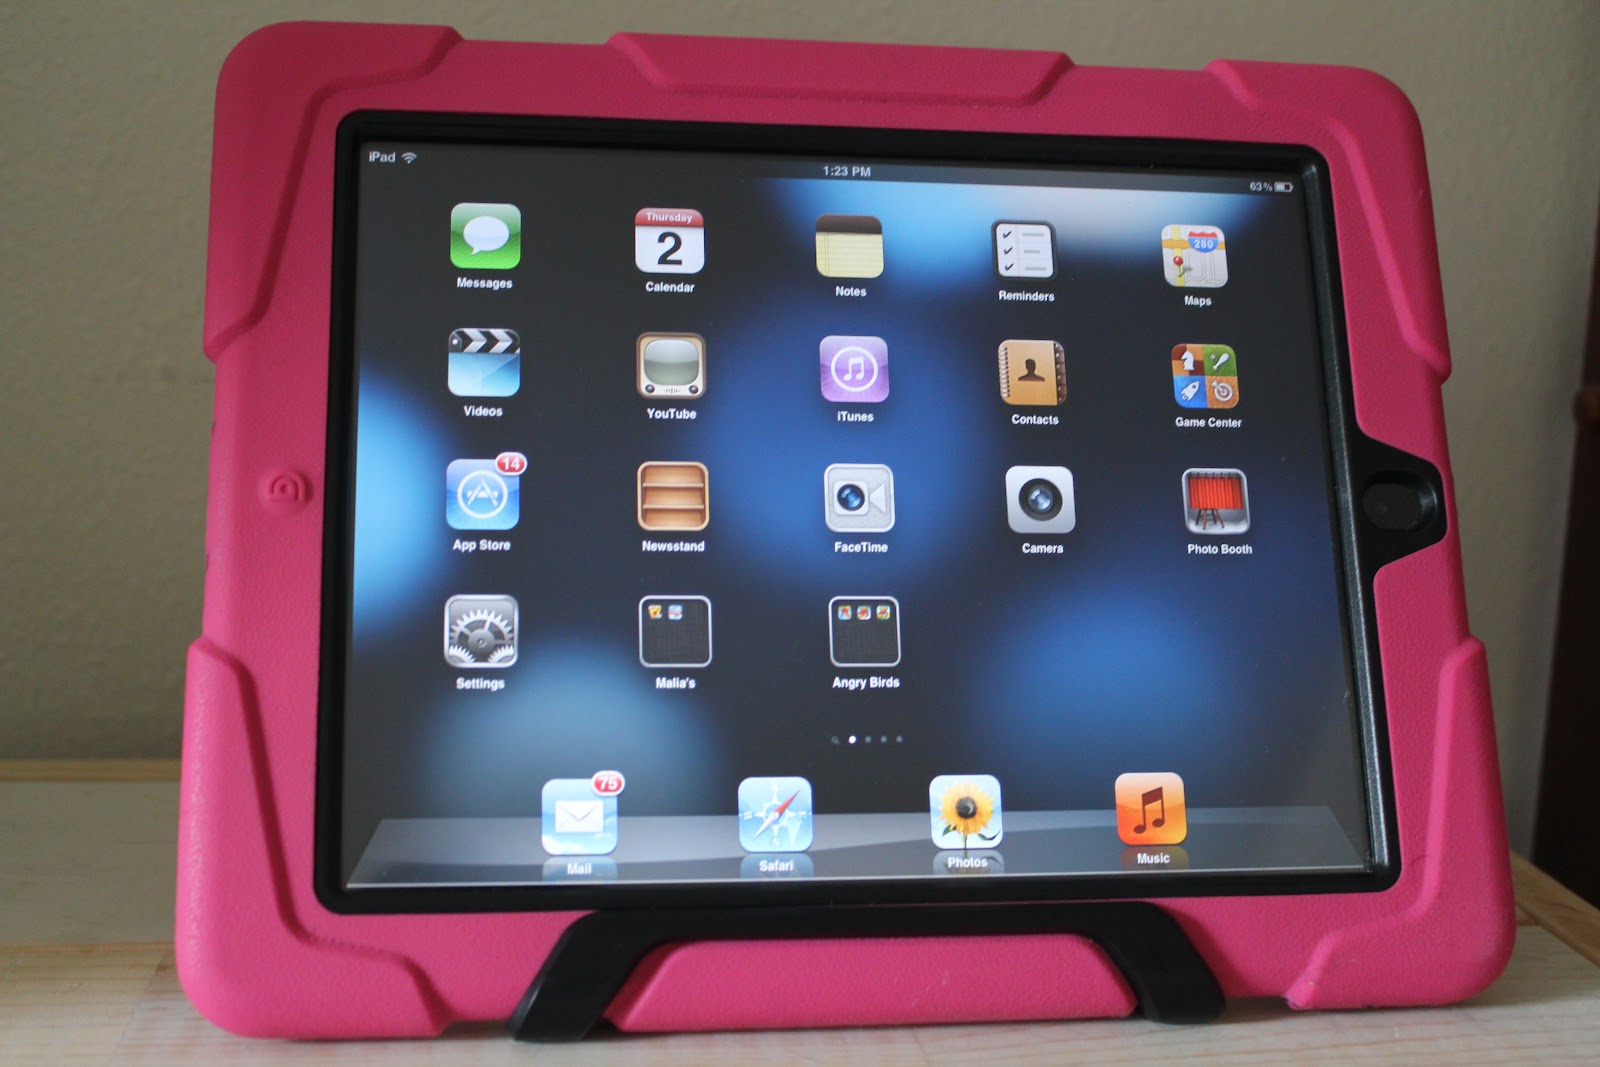 Ipad 3 Cases For Kids